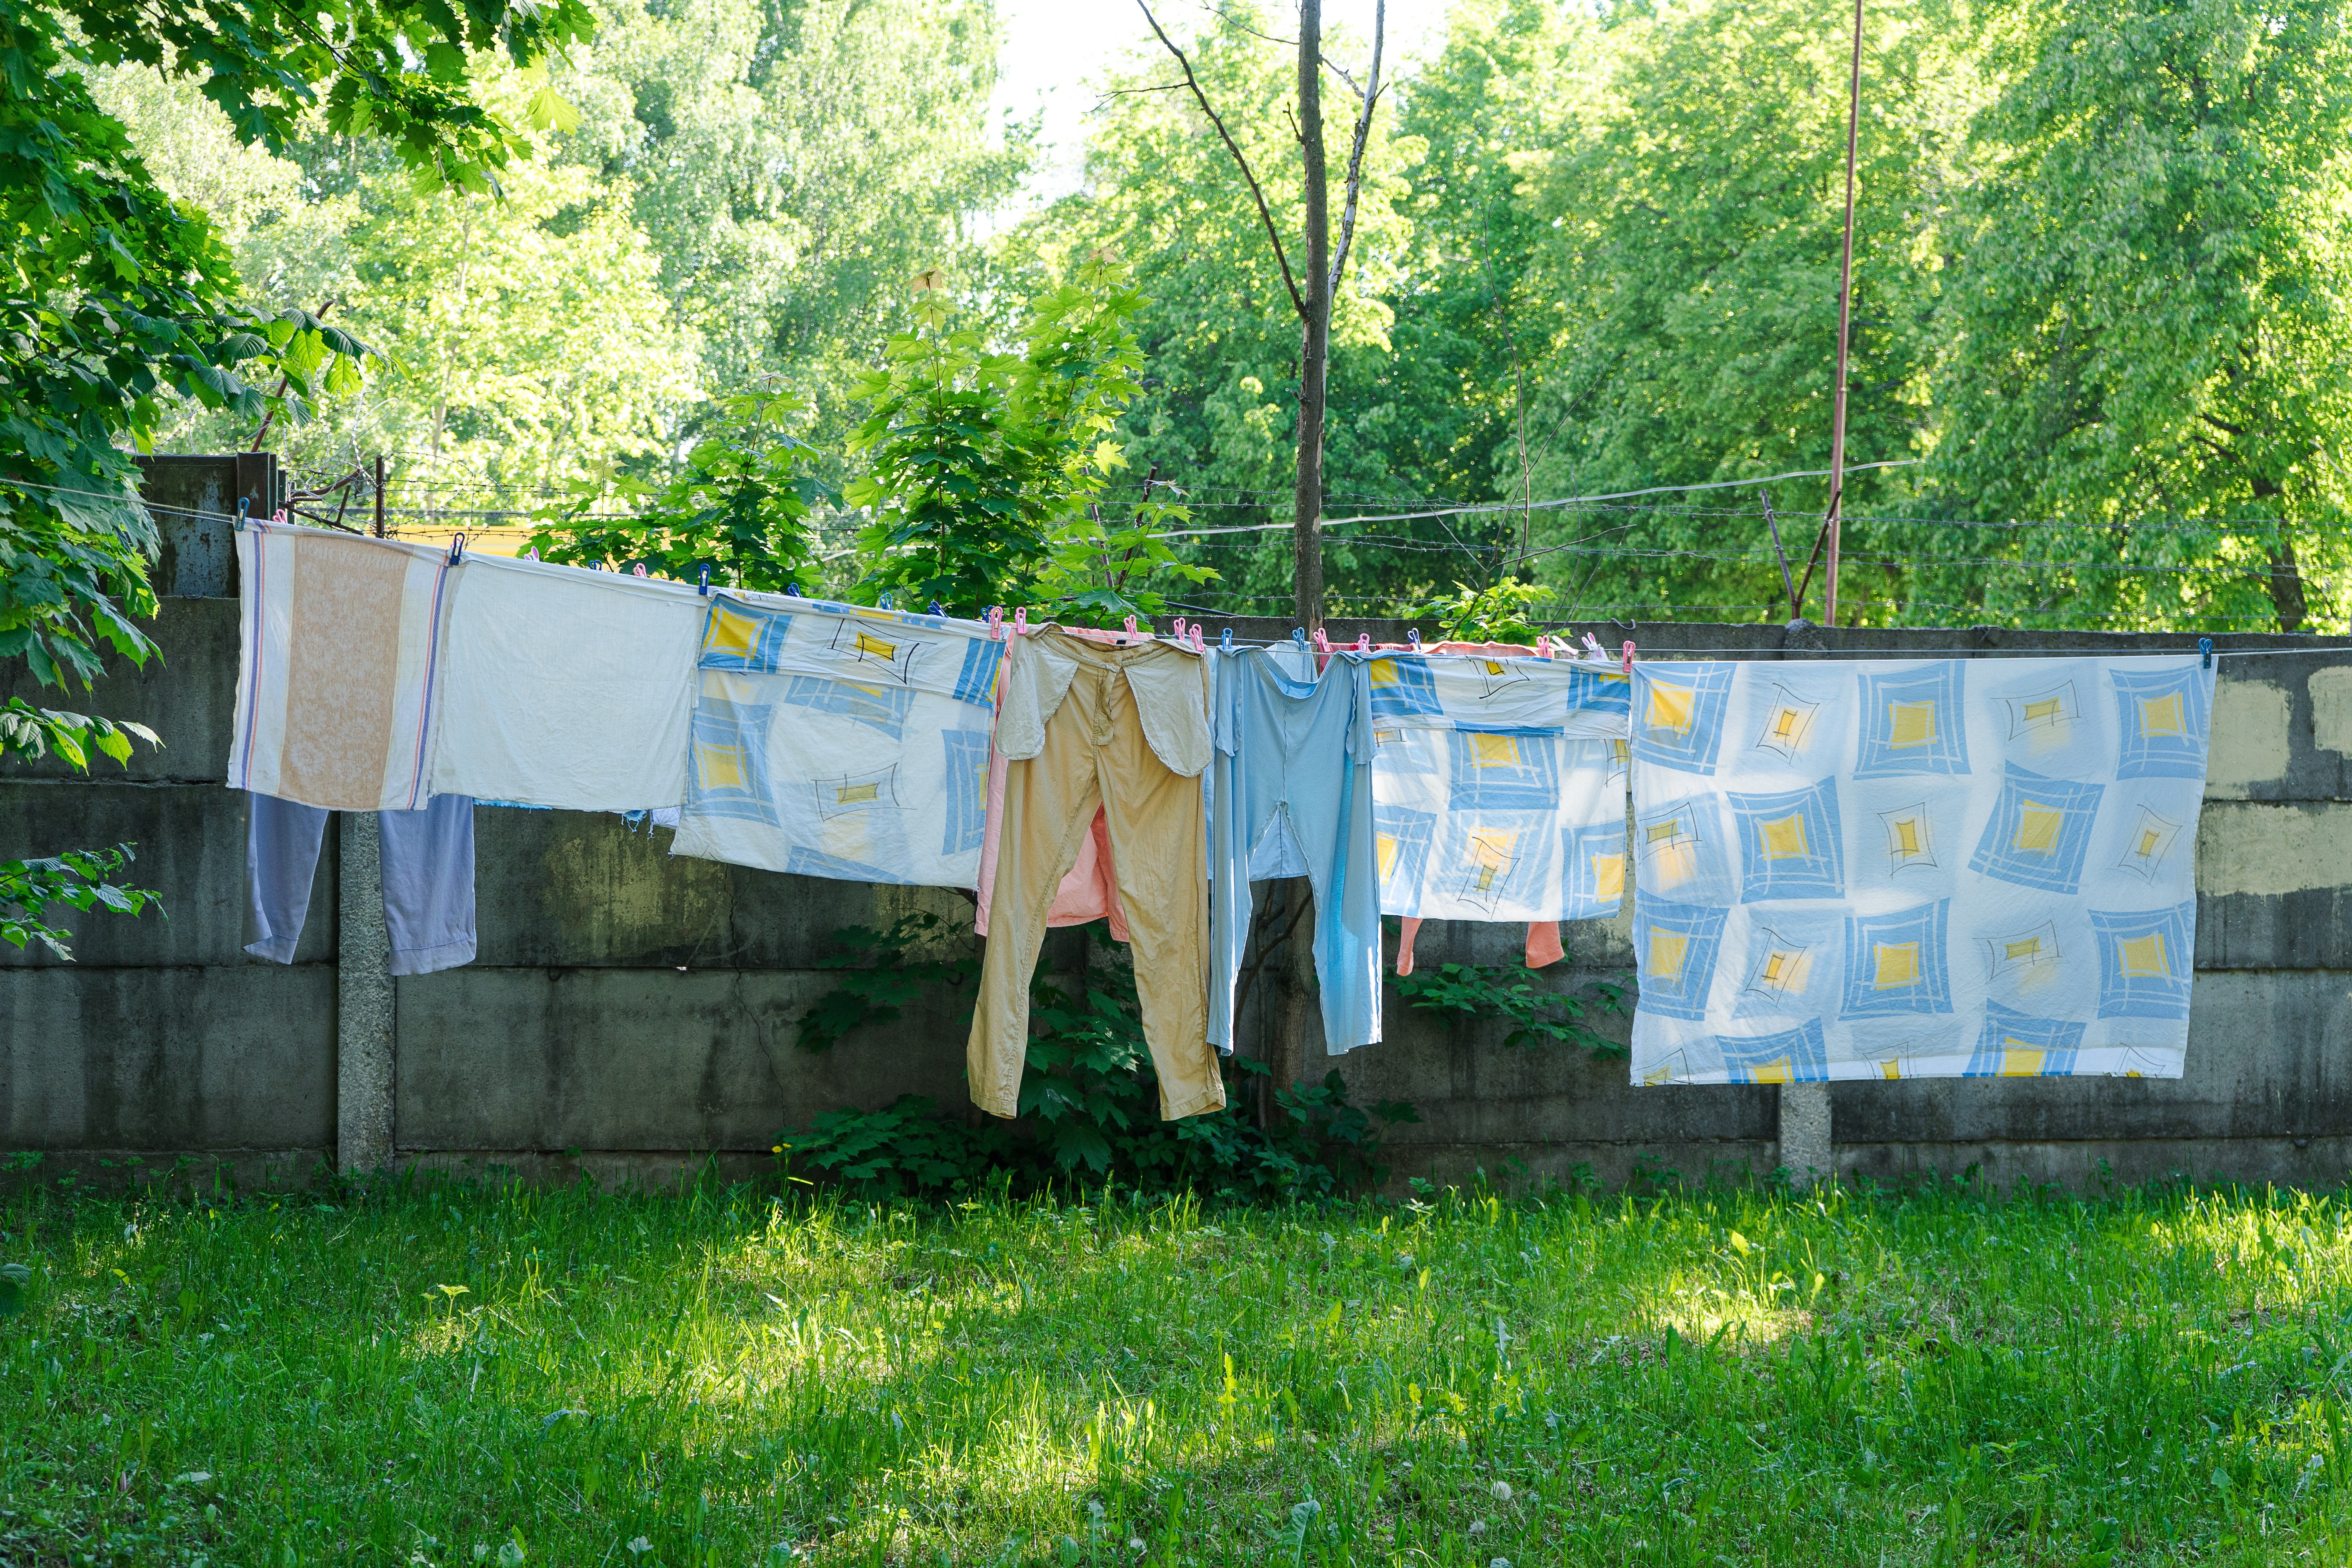 Agnes' clothes were drying in the backyard when Michael went to her house. | Source: Pexels